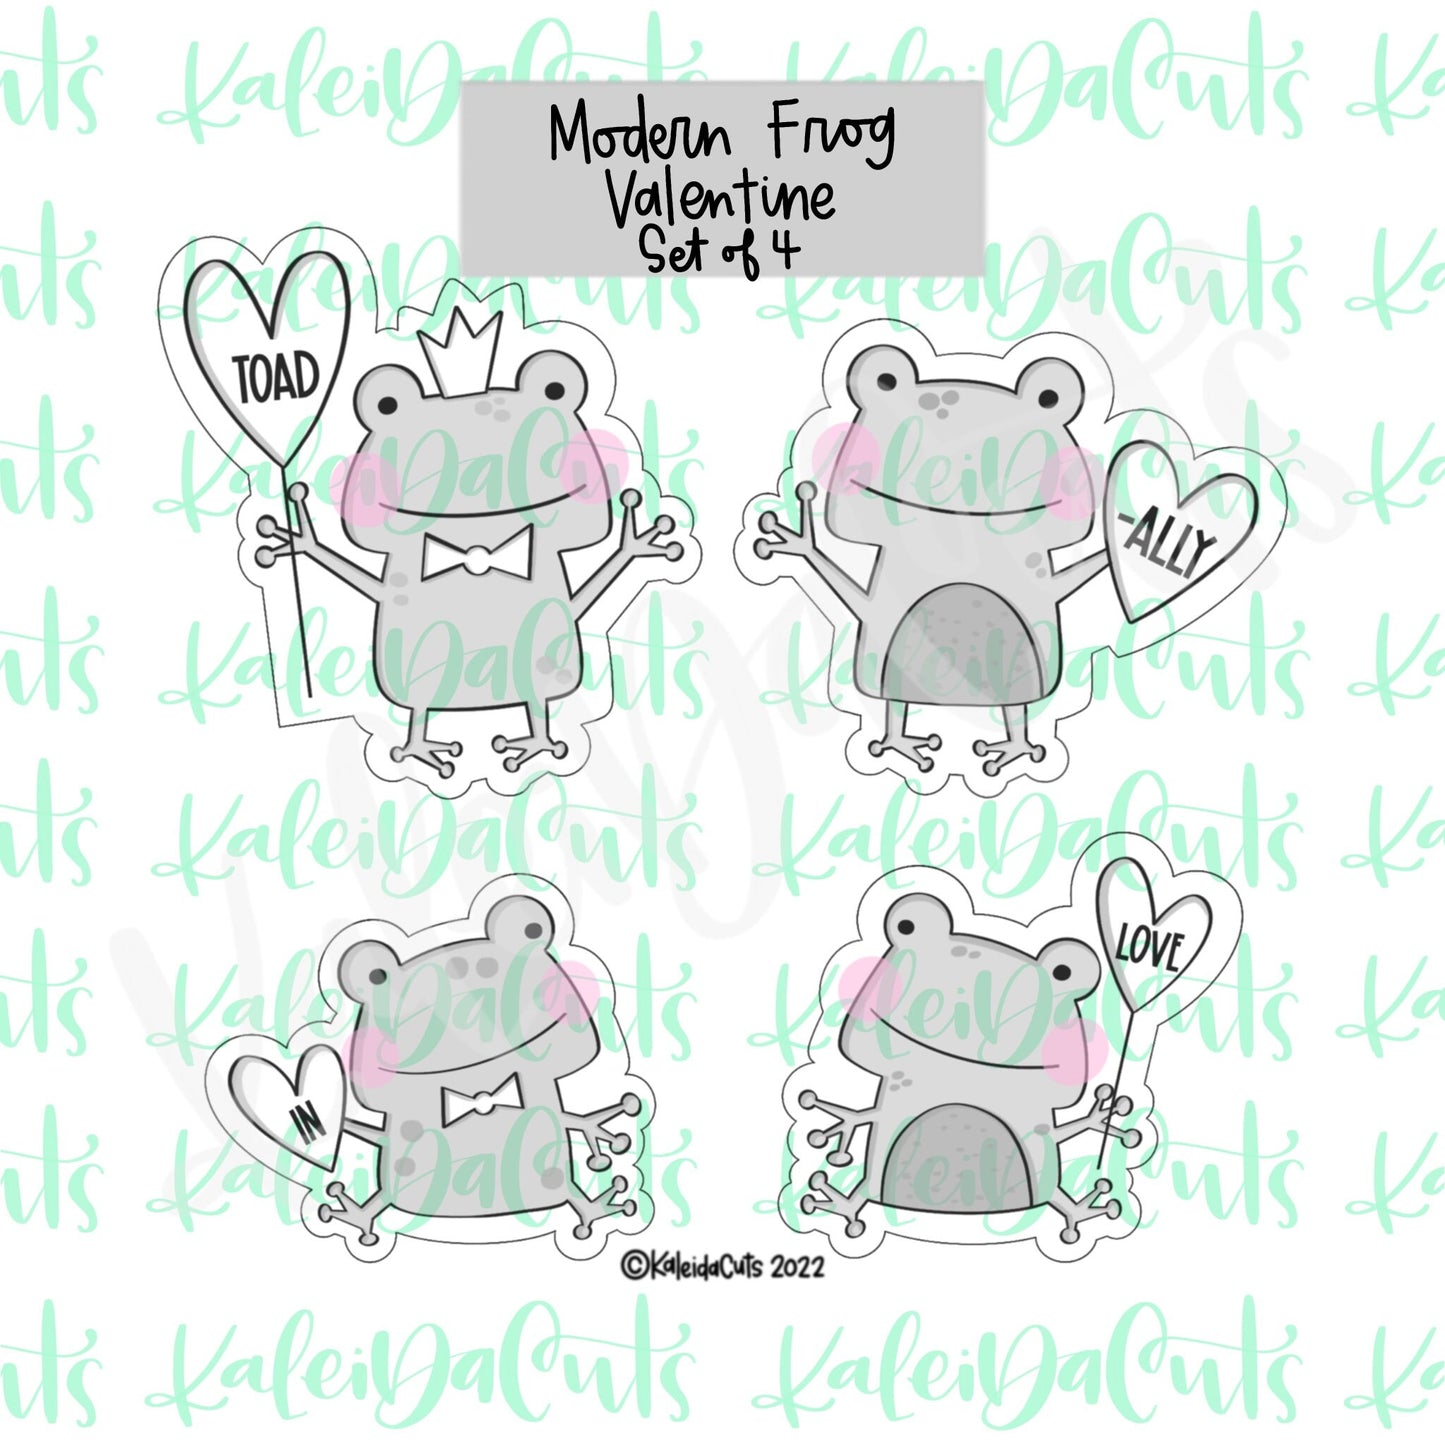 Modern Frog Valentine Set of 4 Cookie Cutters